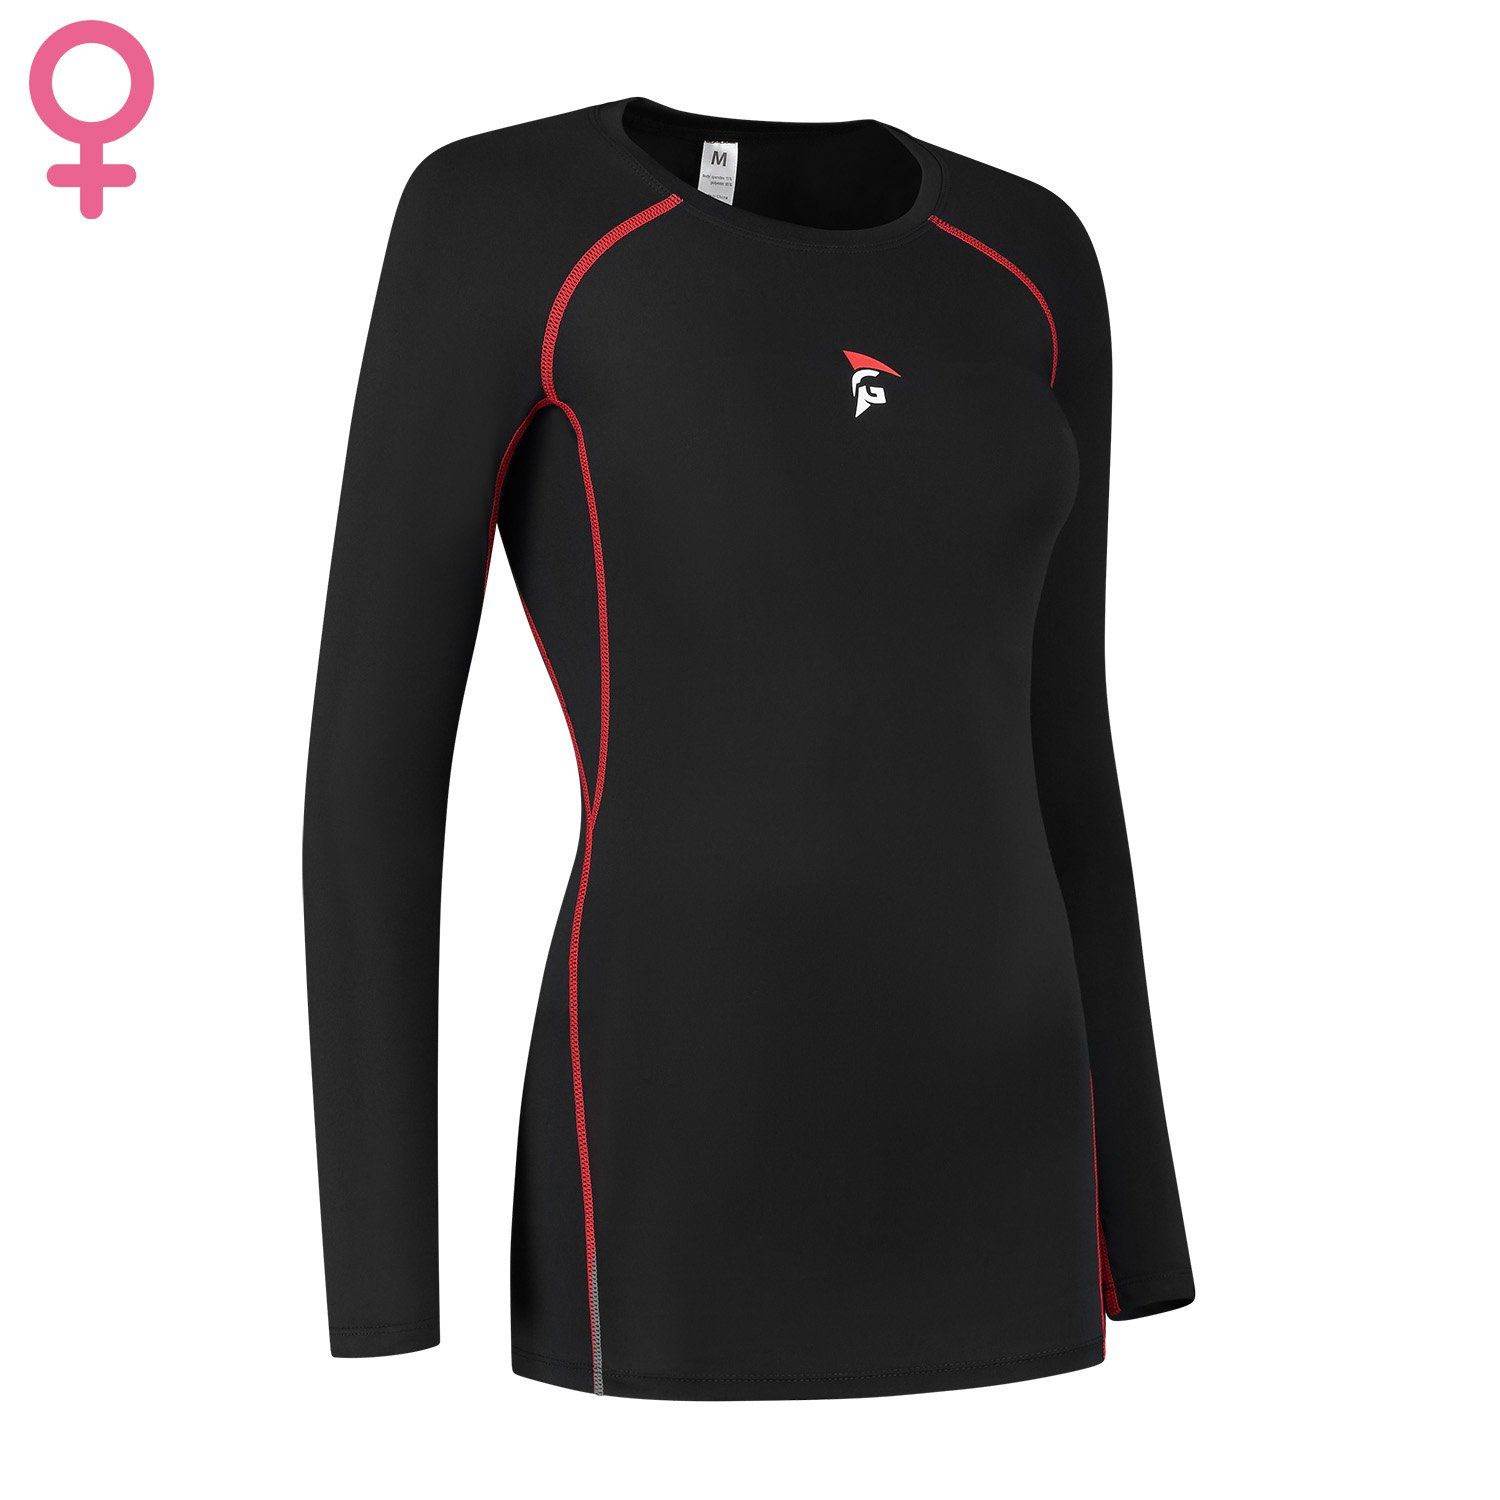 gladiator sports longsleeve compression top for woman